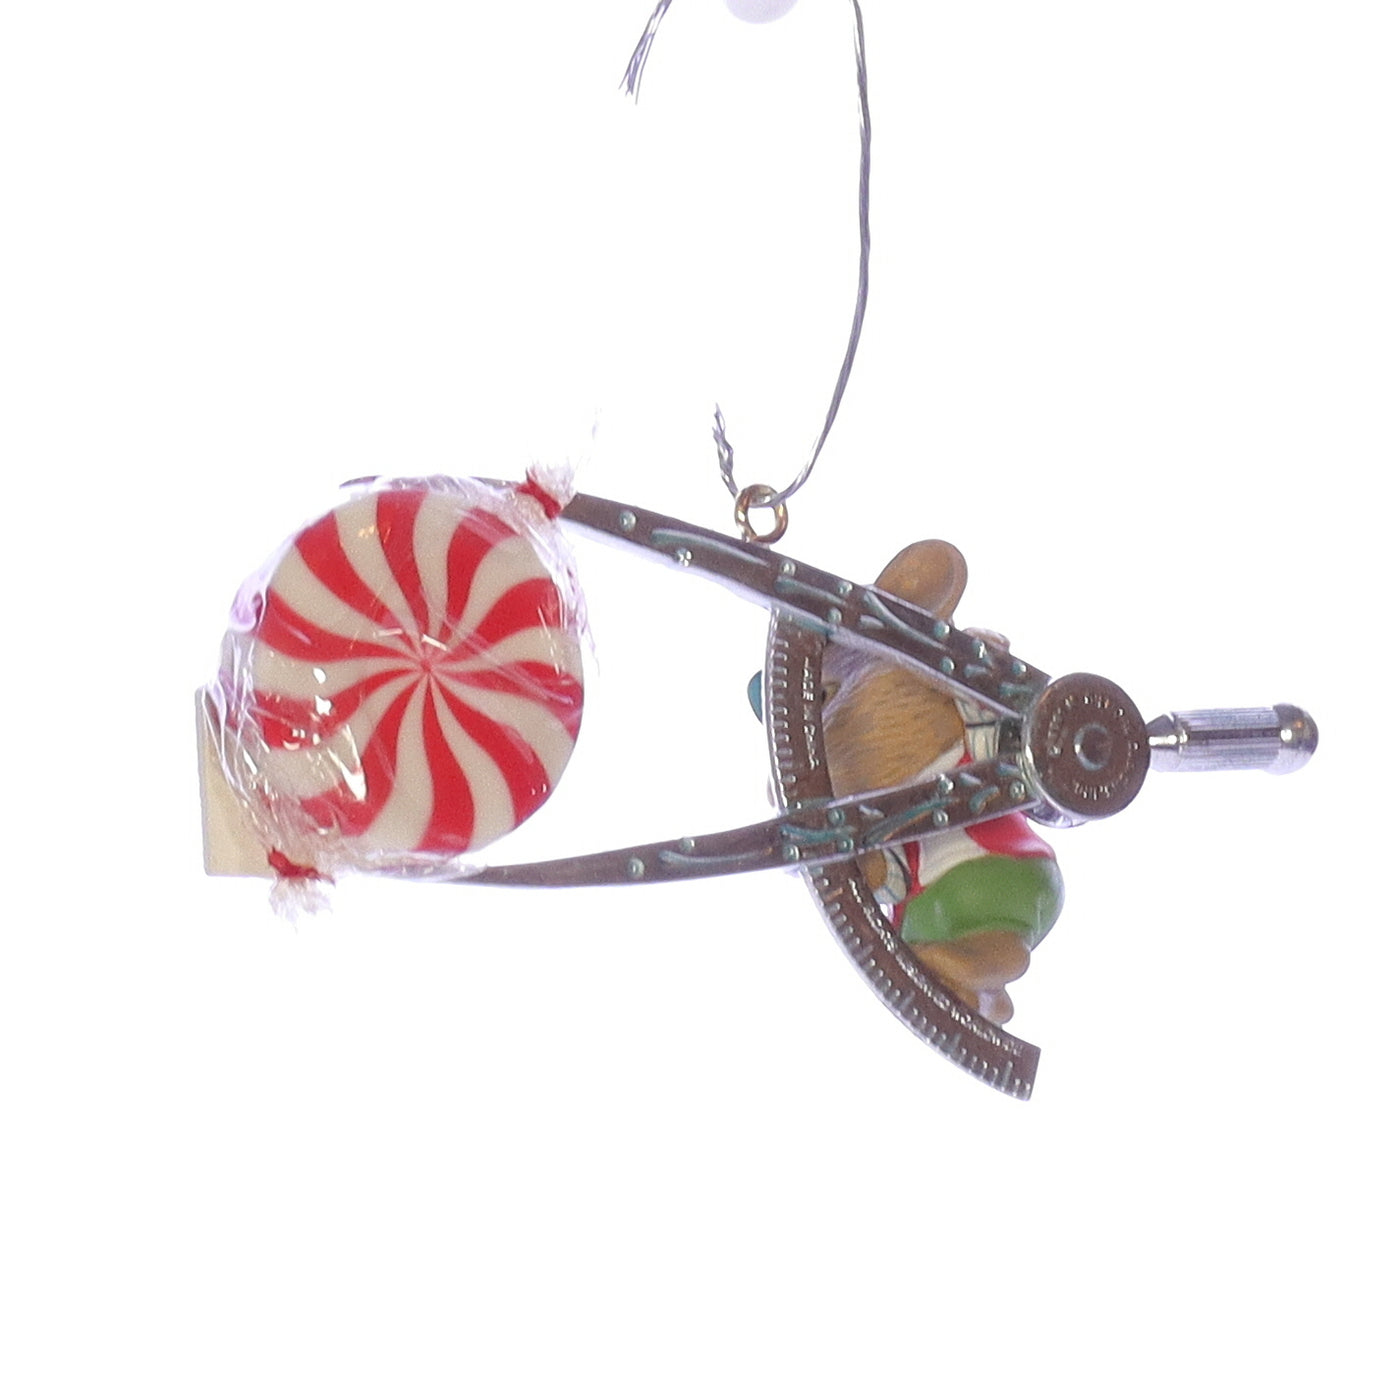 Enesco_Treasury_of_Christmas_Ornaments_583677_Merry_Millimeter_Mouse_Ornament_1993 Back Left View